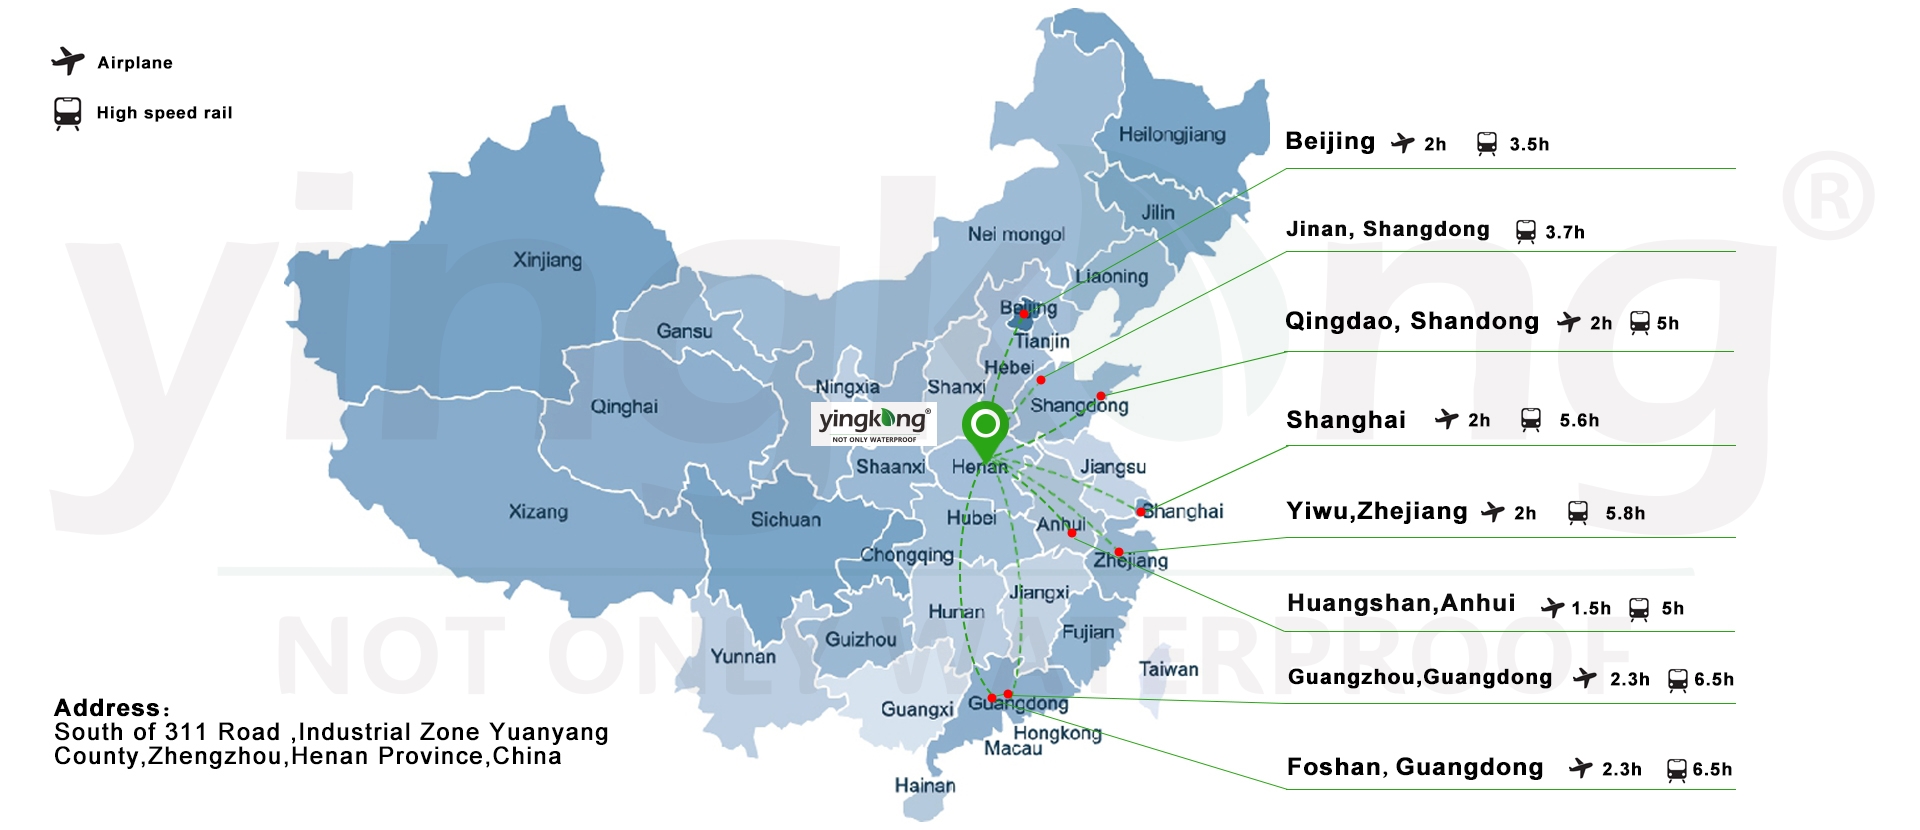 The routes to Yingkangdoors 